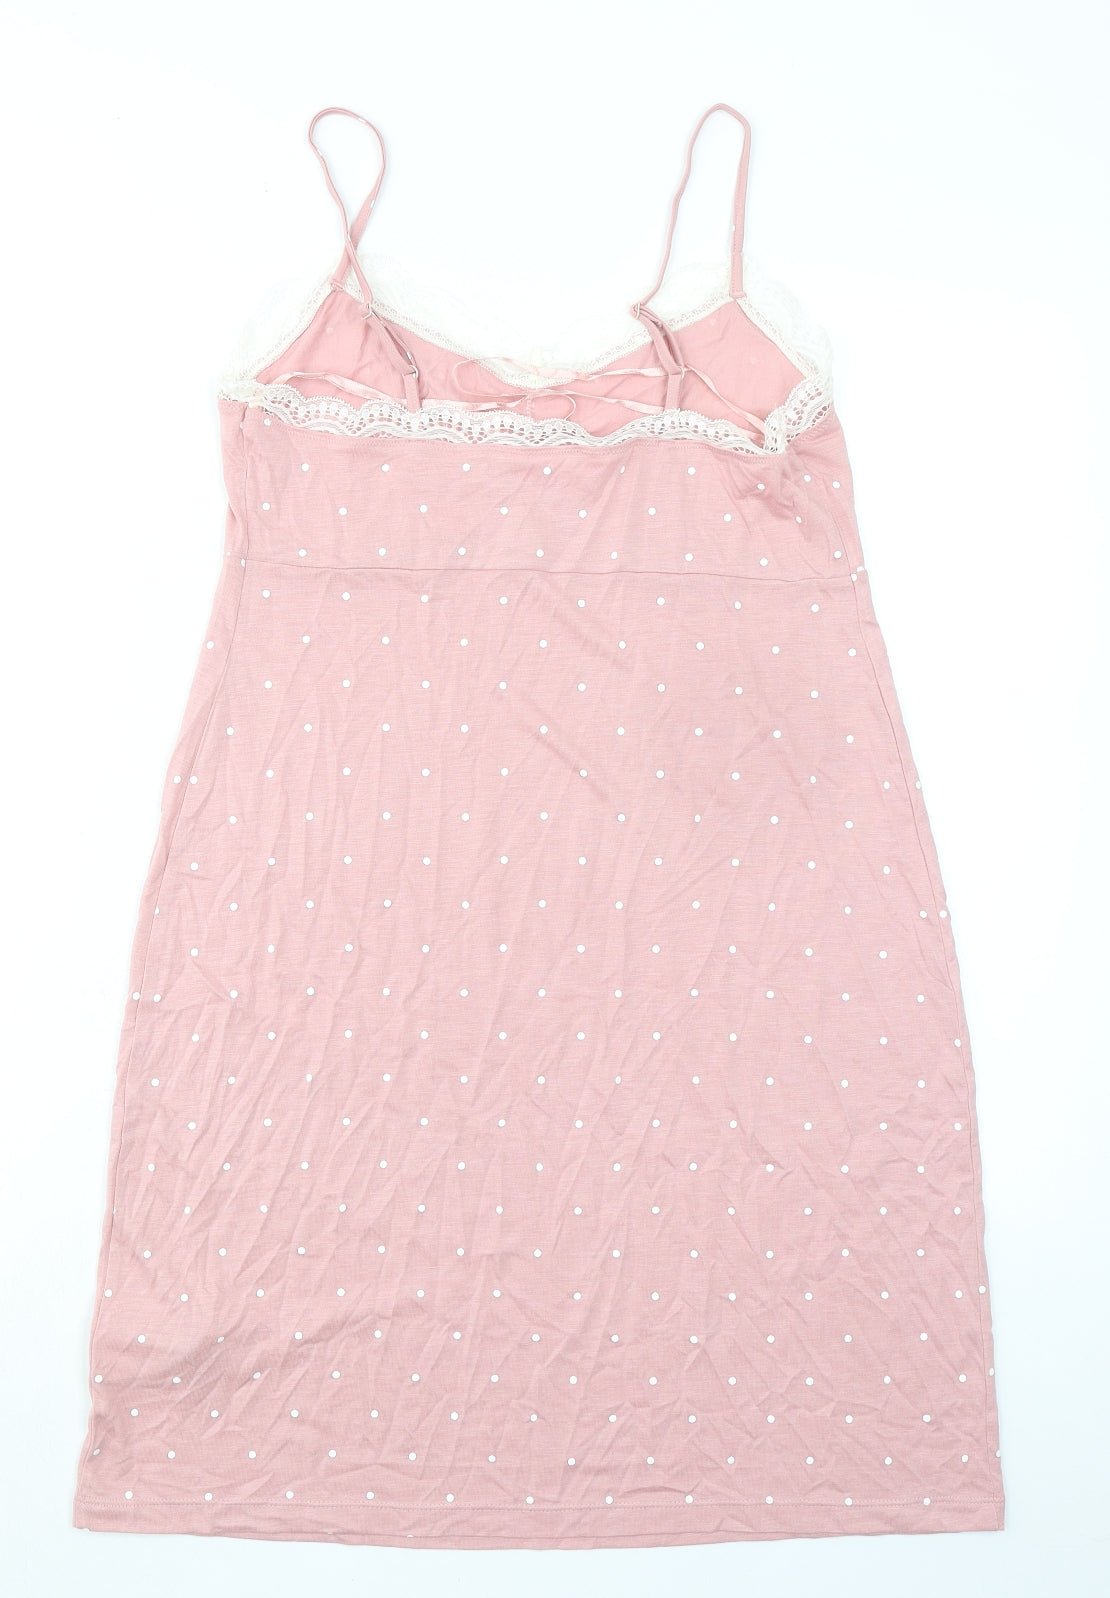 Marks and Spencer Womens Pink Polka Dot Viscose Top Dress Size M - Lace Trim